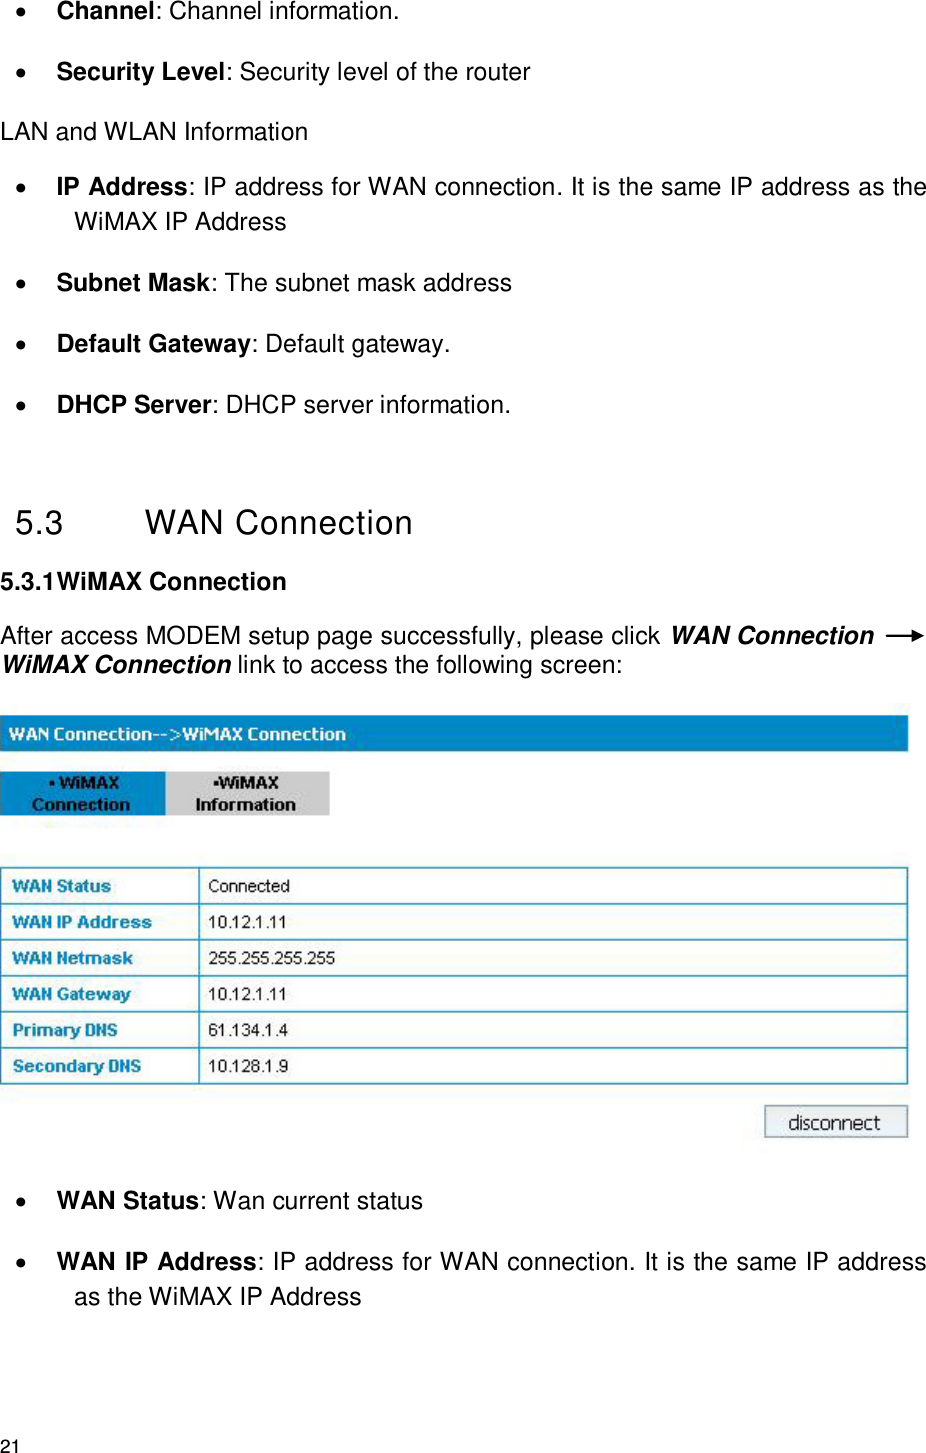 21  Channel: Channel information.  Security Level: Security level of the router LAN and WLAN Information  IP Address: IP address for WAN connection. It is the same IP address as the WiMAX IP Address  Subnet Mask: The subnet mask address  Default Gateway: Default gateway.    DHCP Server: DHCP server information.  5.3  WAN Connection   5.3.1 WiMAX Connection   After access MODEM setup page successfully, please click WAN Connection WiMAX Connection link to access the following screen:   WAN Status: Wan current status  WAN IP Address: IP address for WAN connection. It is the same IP address as the WiMAX IP Address 